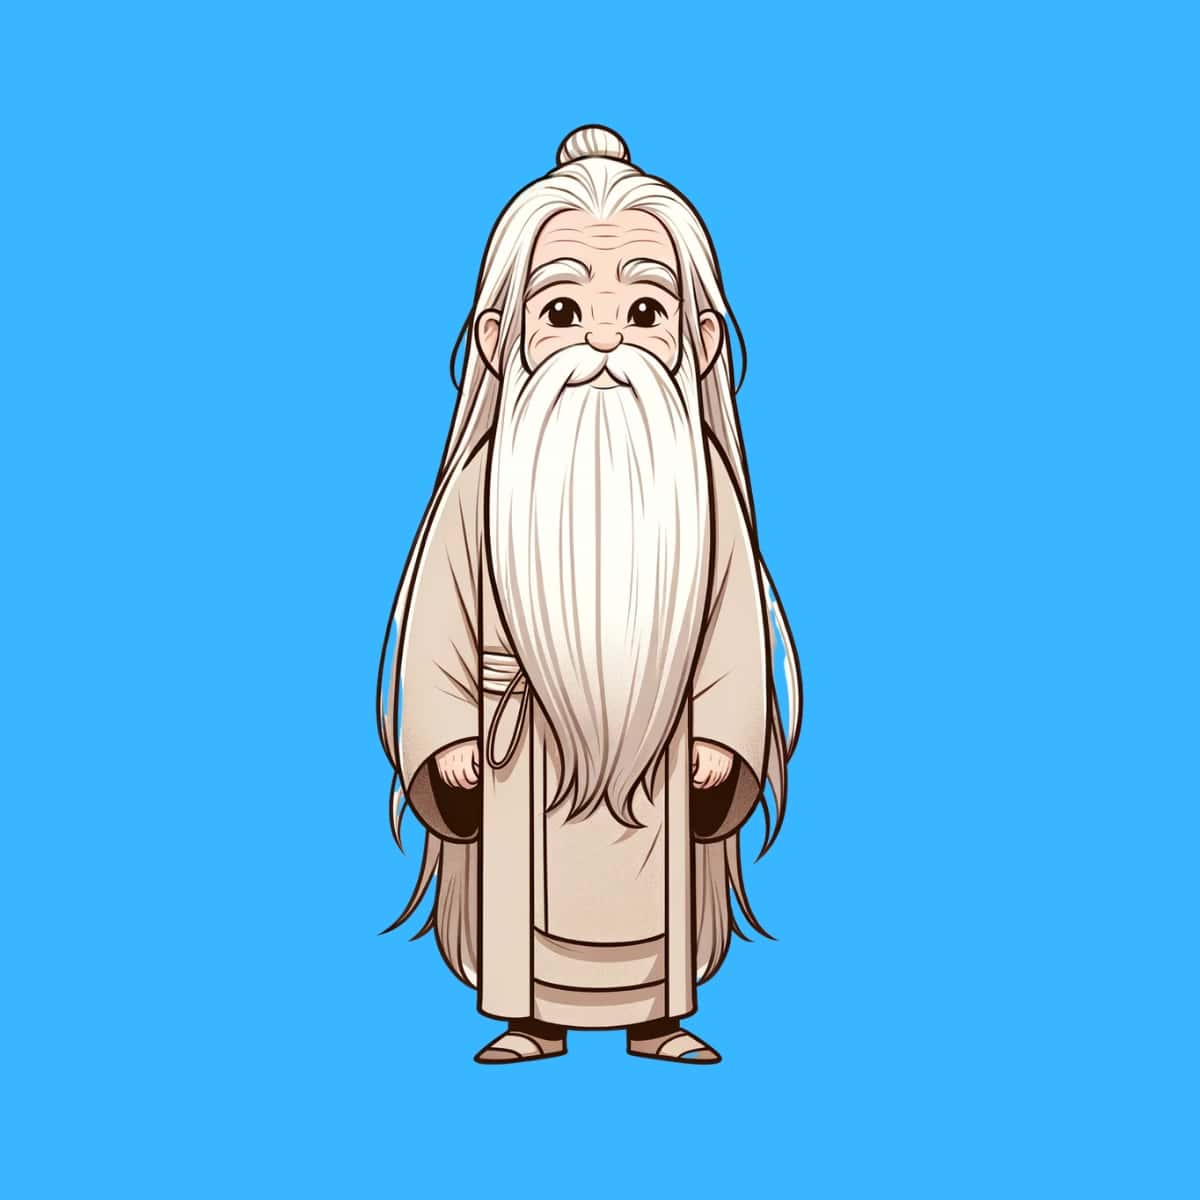 A cartoon graphic of an old Chinese man in a robe with a very long white beard on a blue background.